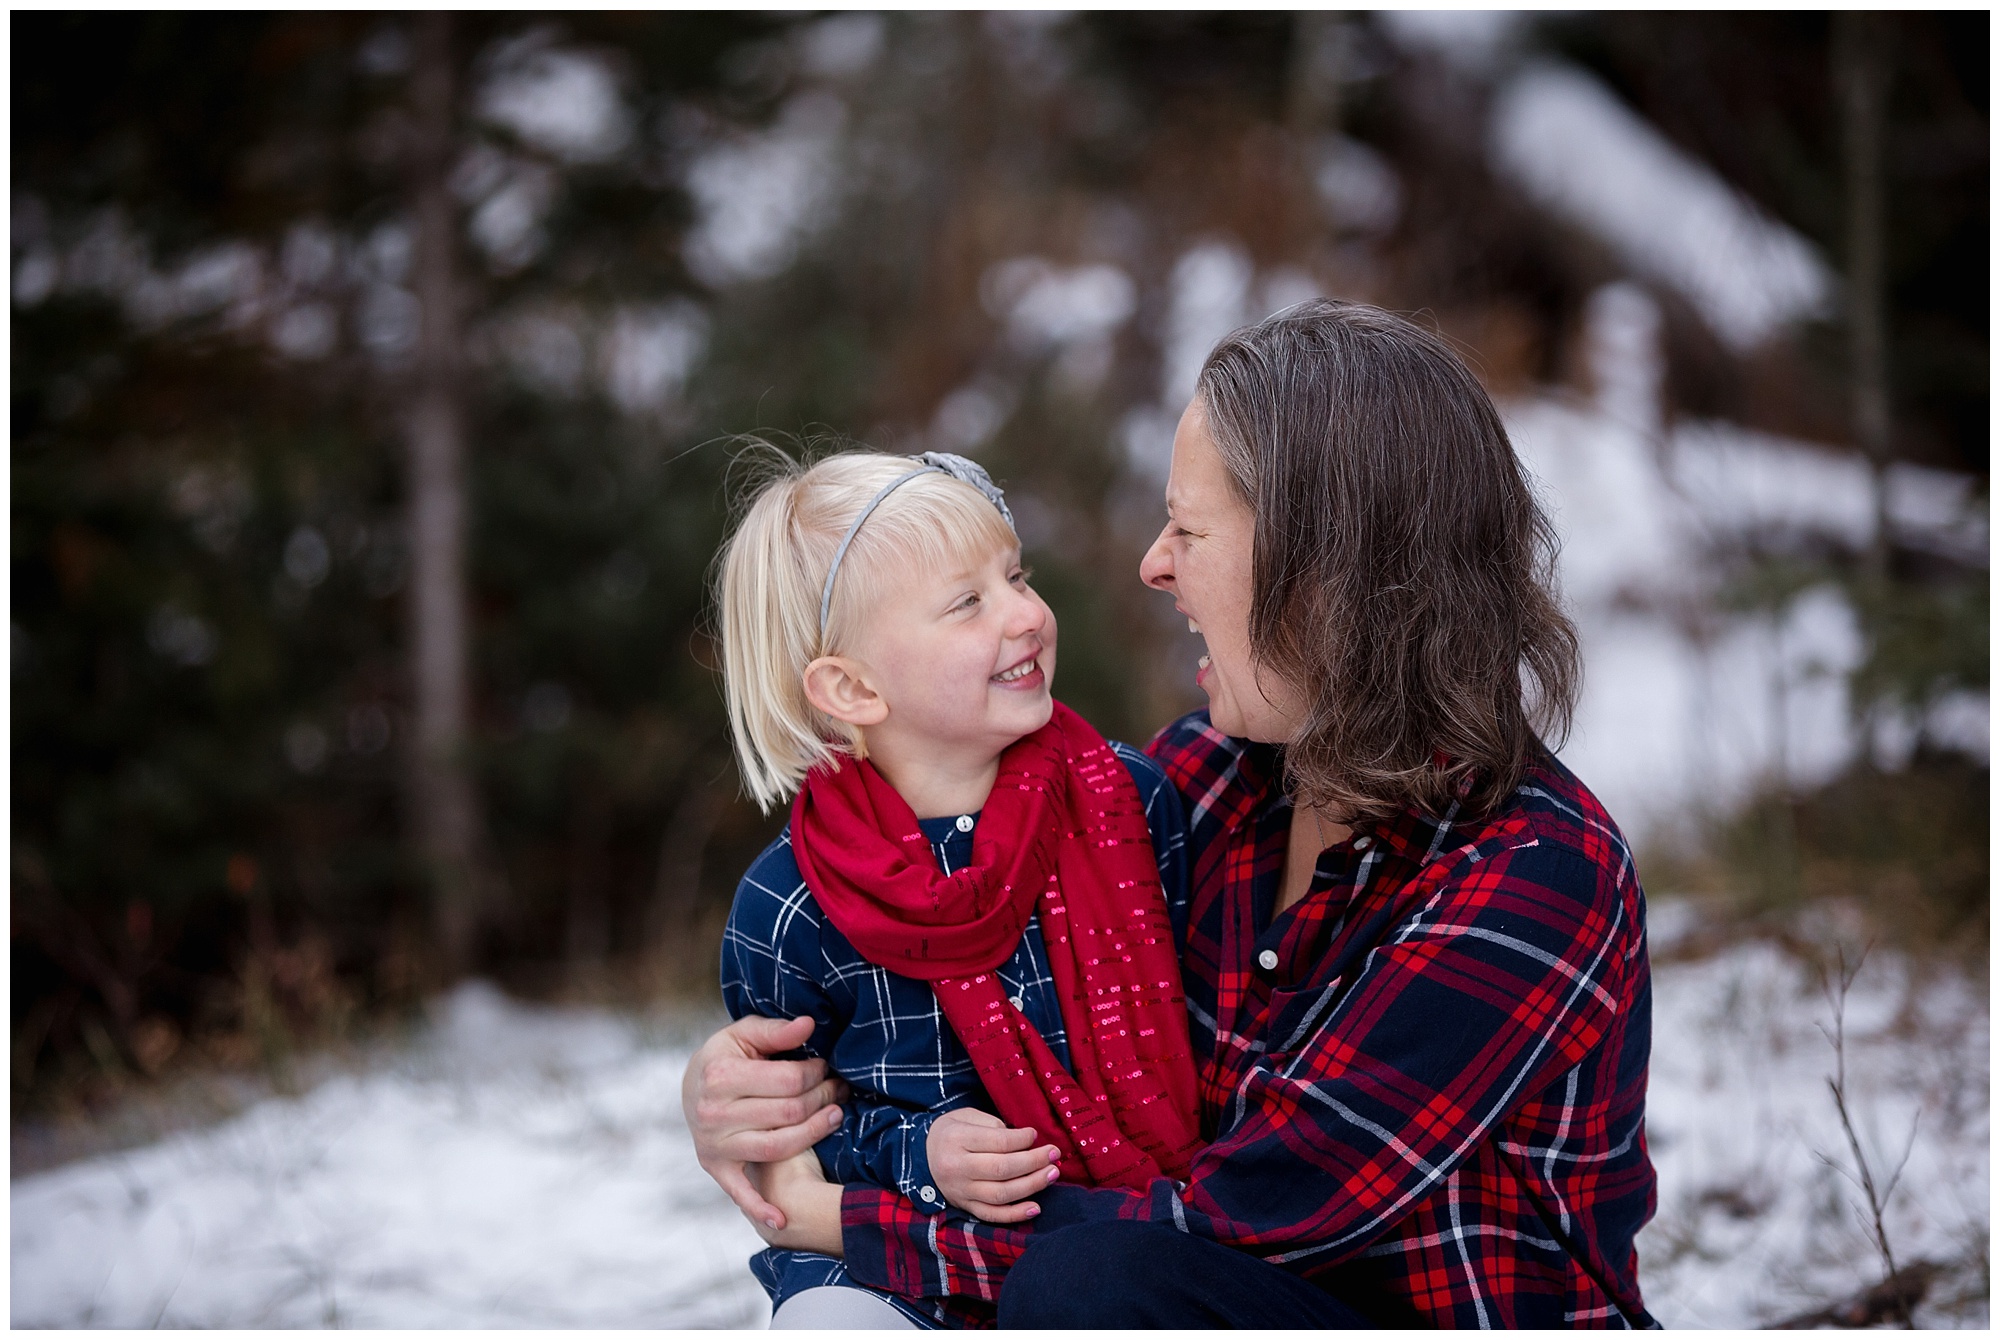 During a Colorado winter family photo session, a mother holds her daughter close.